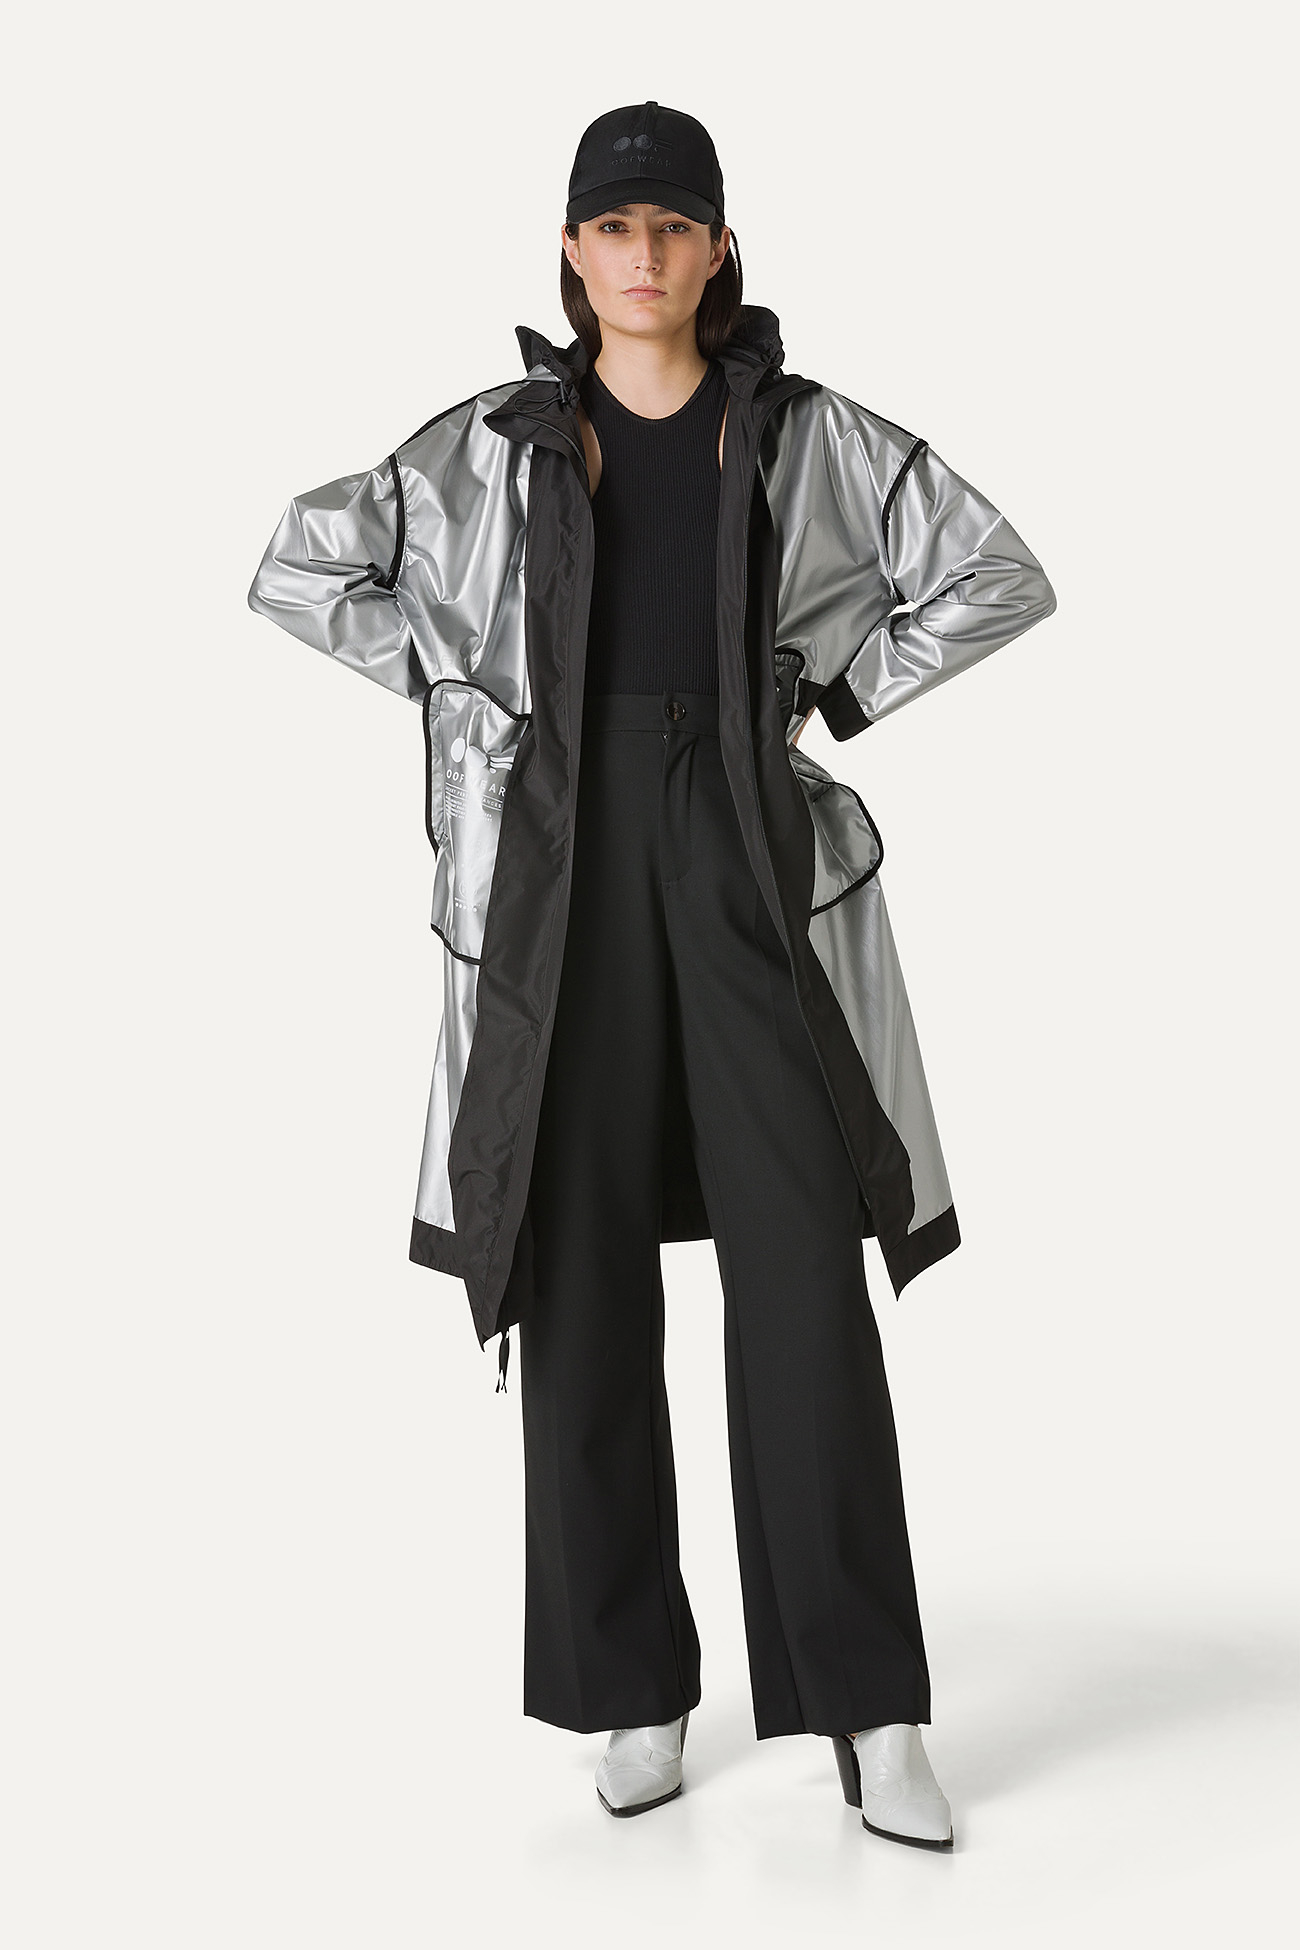 LOMNG NYLON JACKET WITH SILVER LINING 9216 - BLACK - OOF WEAR